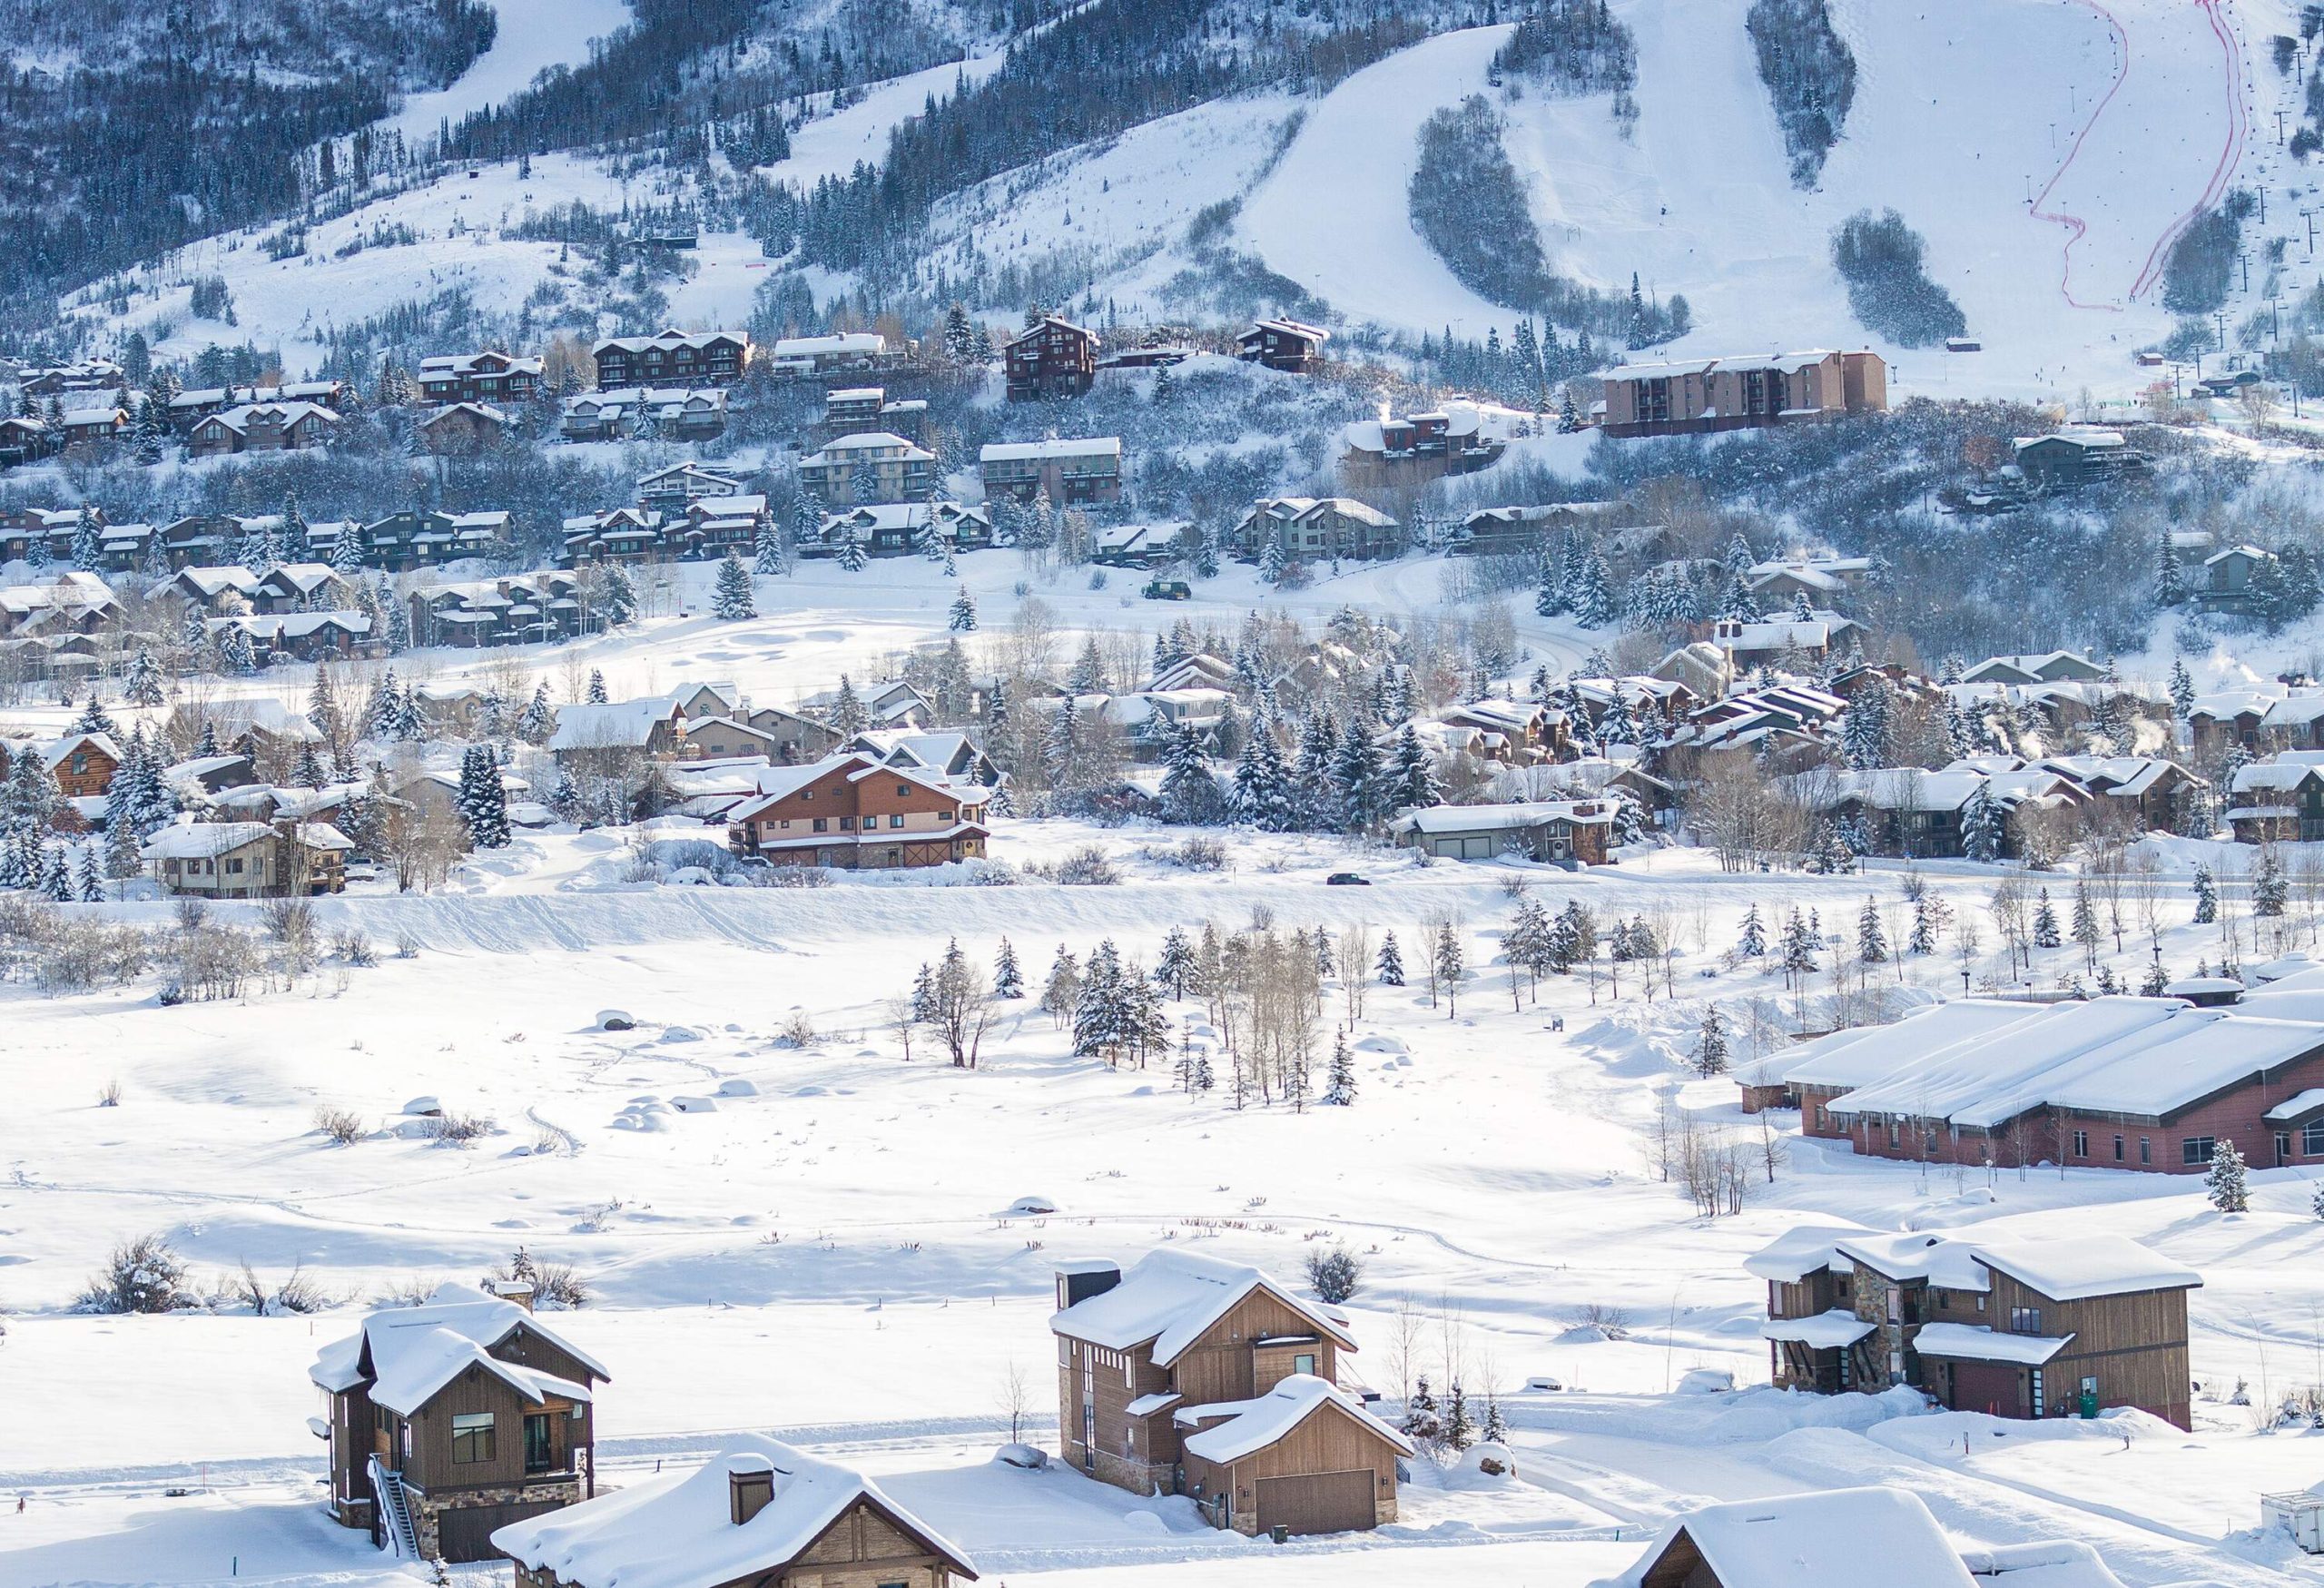 Residential and ski resort buildings in the valley of rolling snow-capped forested mountains.